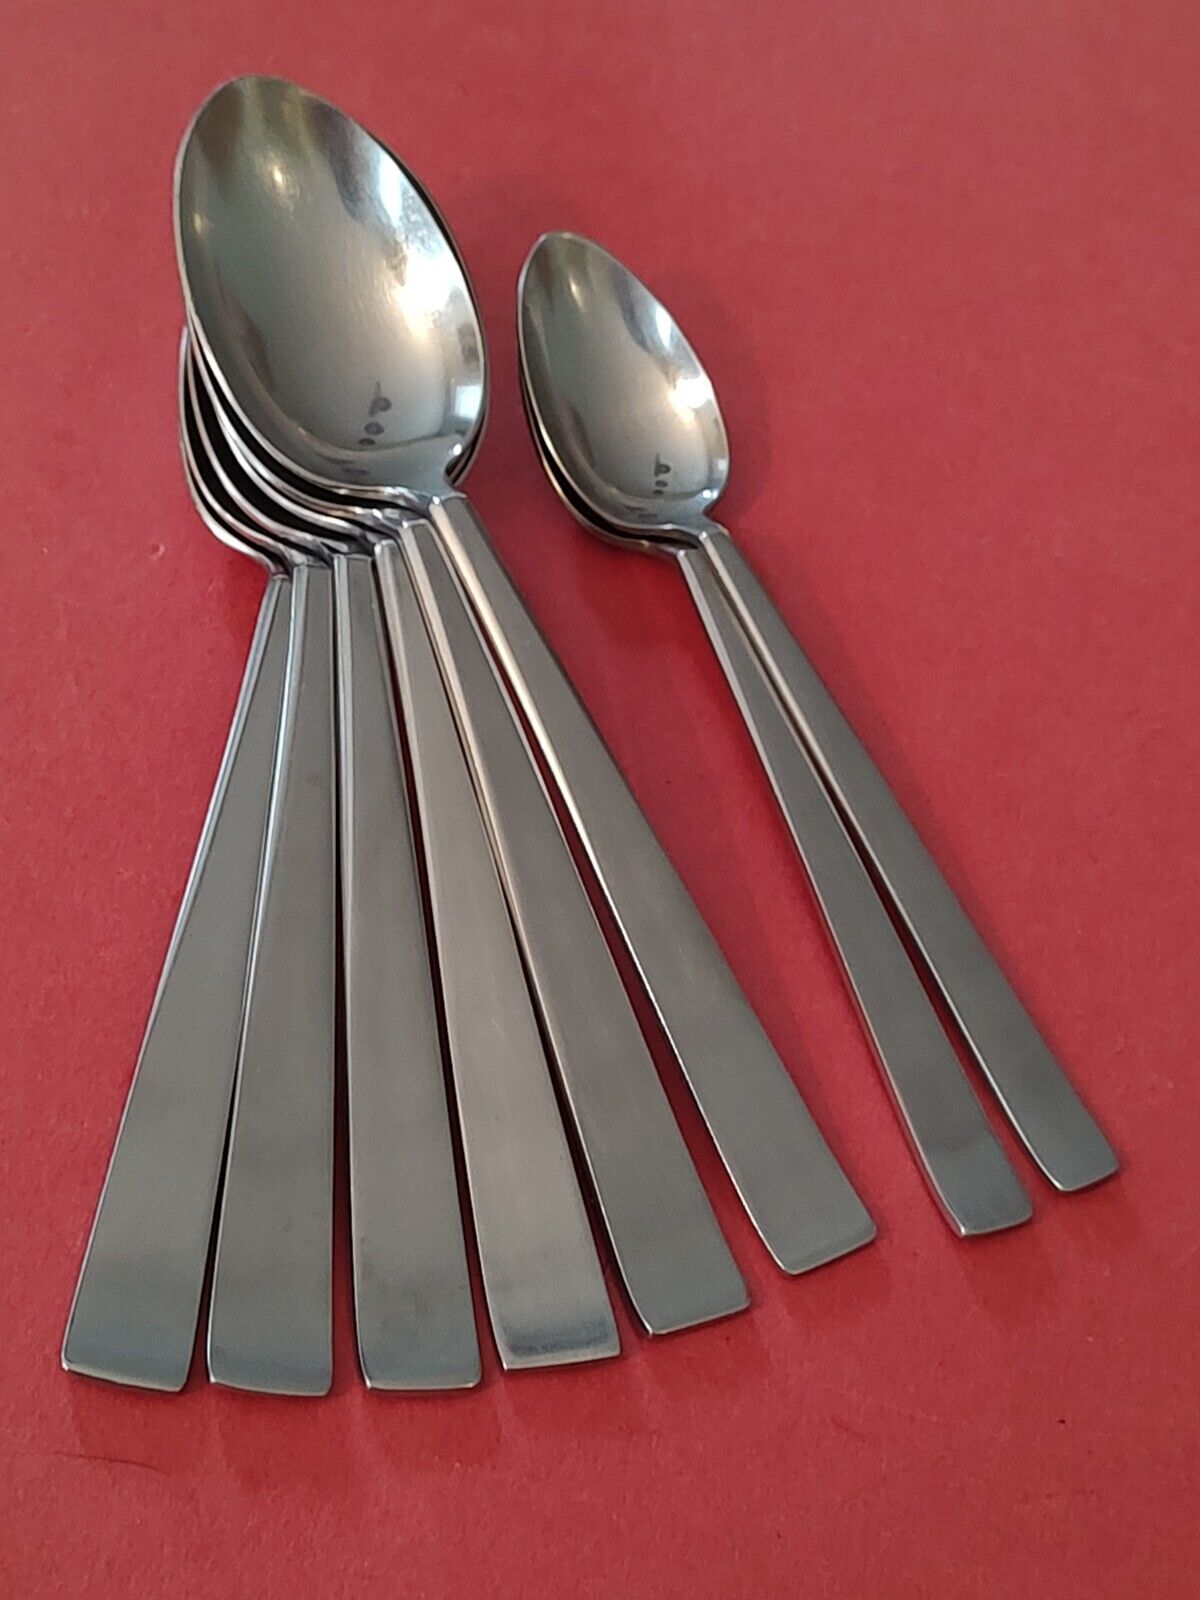 8pc G-Sola-Z CORA Stainless Steel 6 SOUP 2 TEA SPOONS Holland 